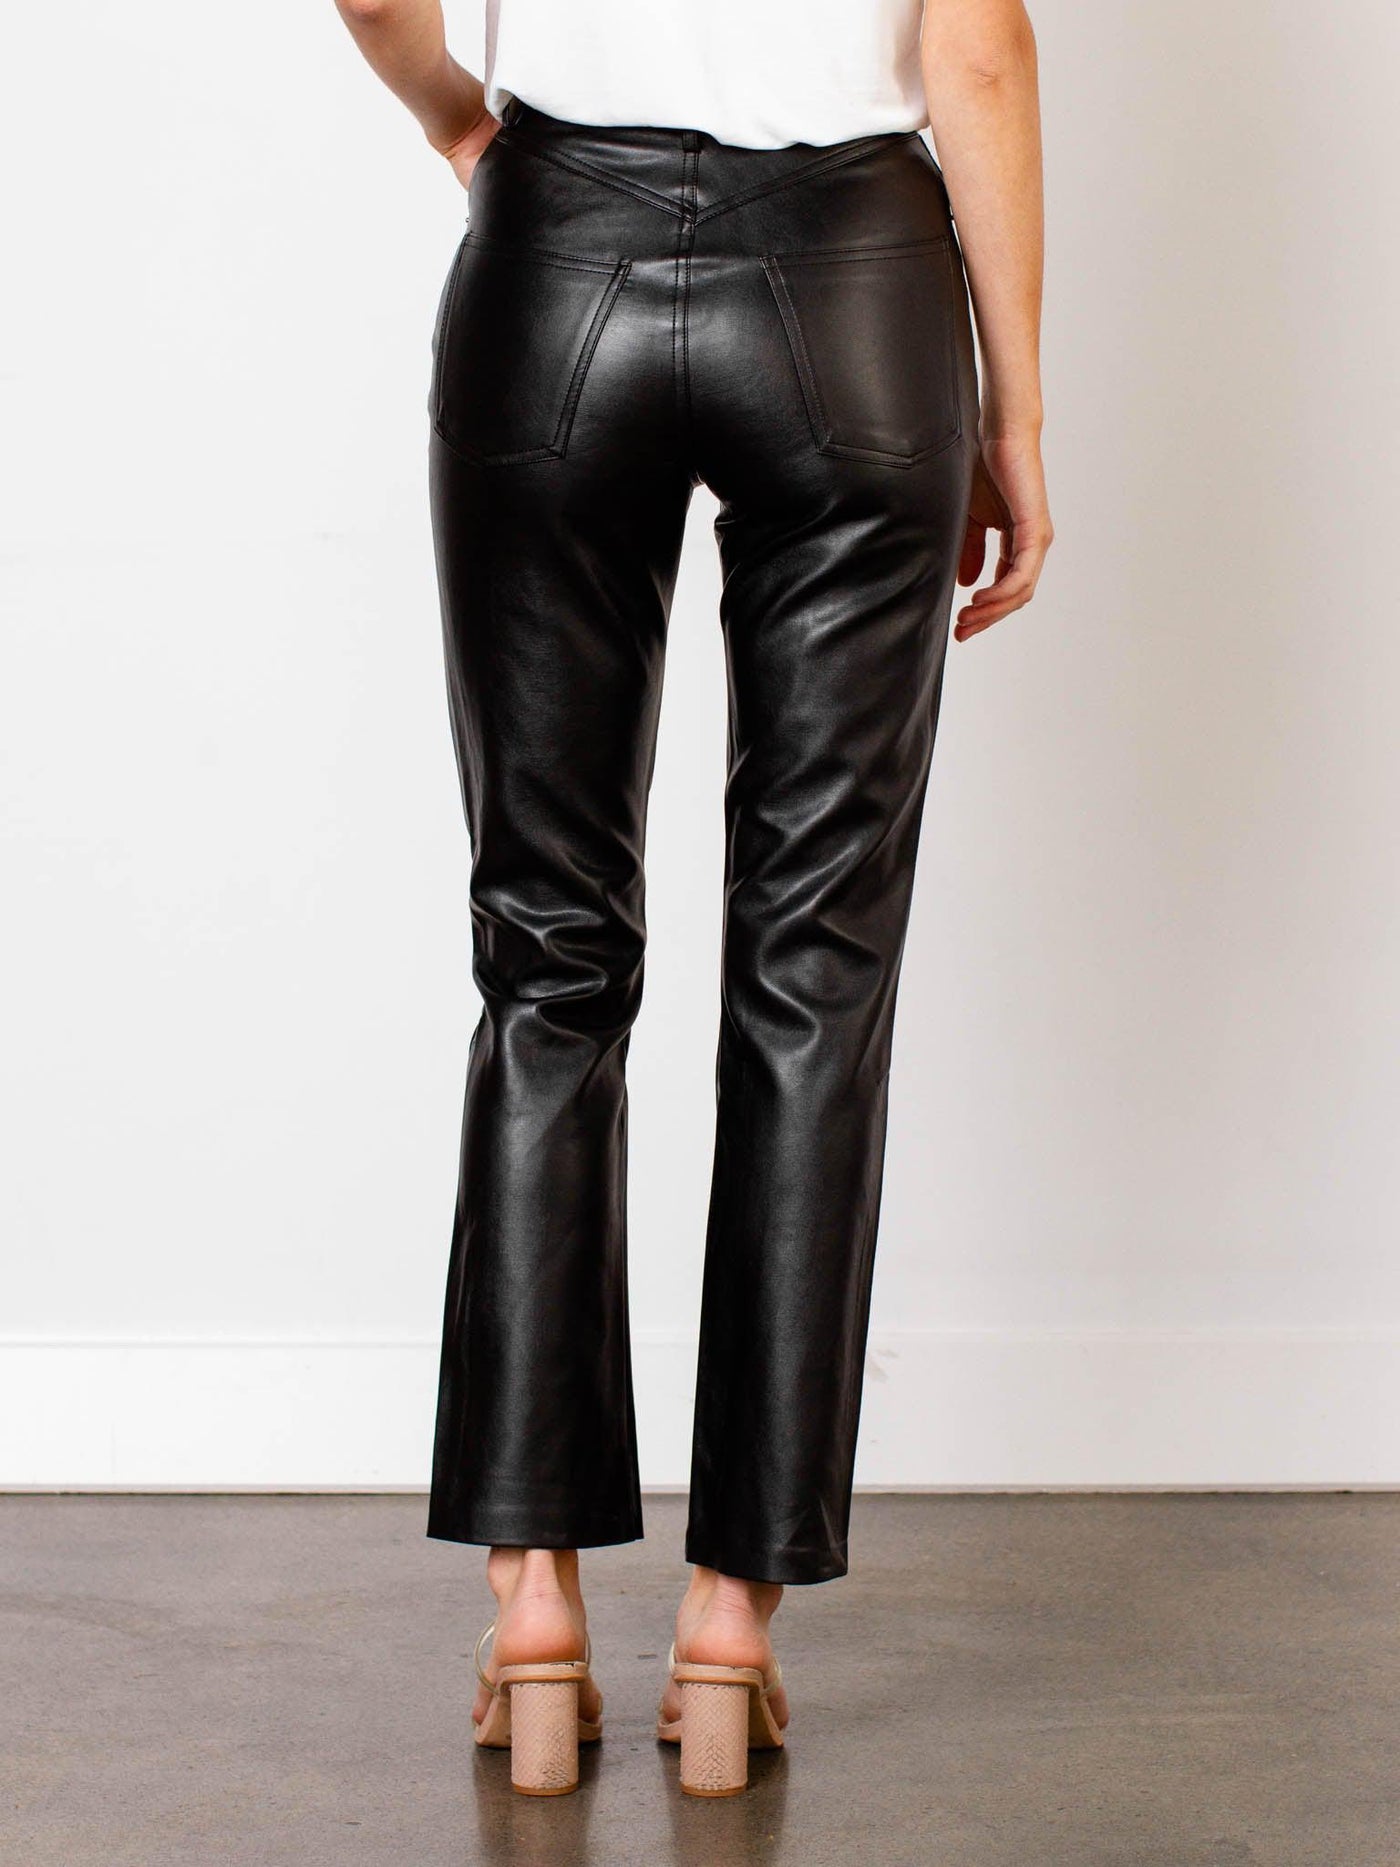 staright cropped faux leather pants